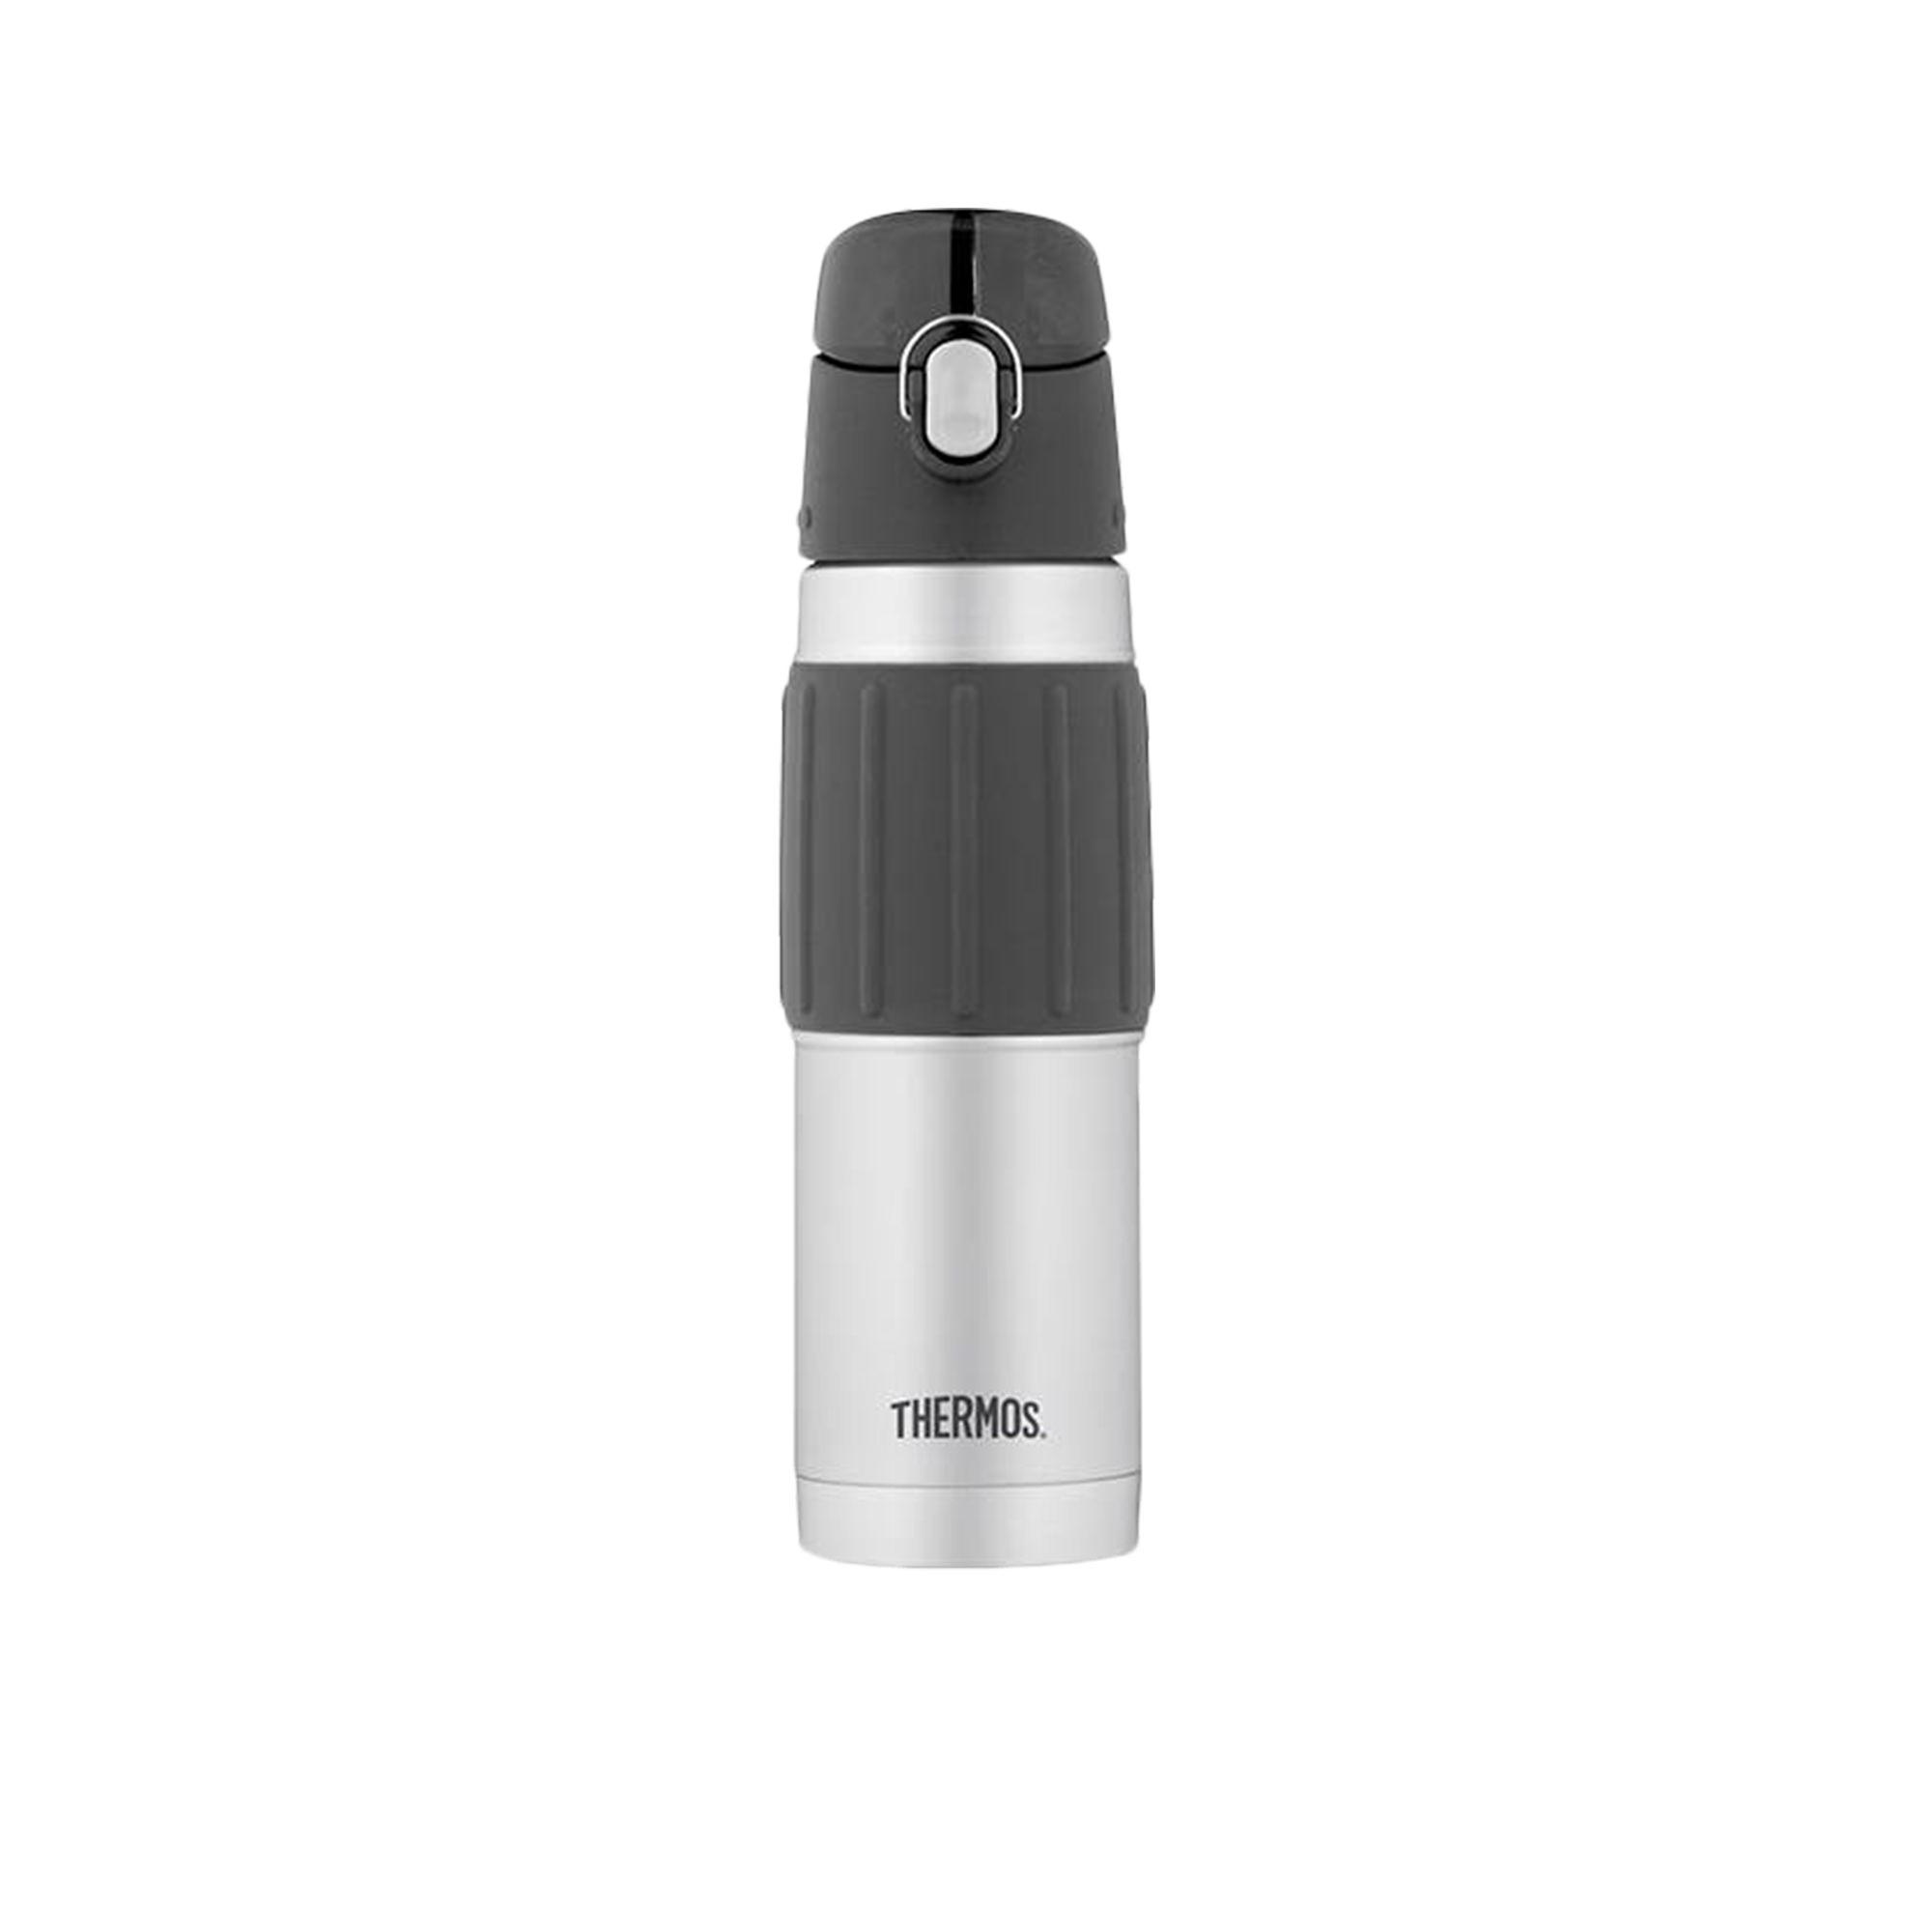 Thermos Insulated Bottle with Flip Lid 530ml Image 1